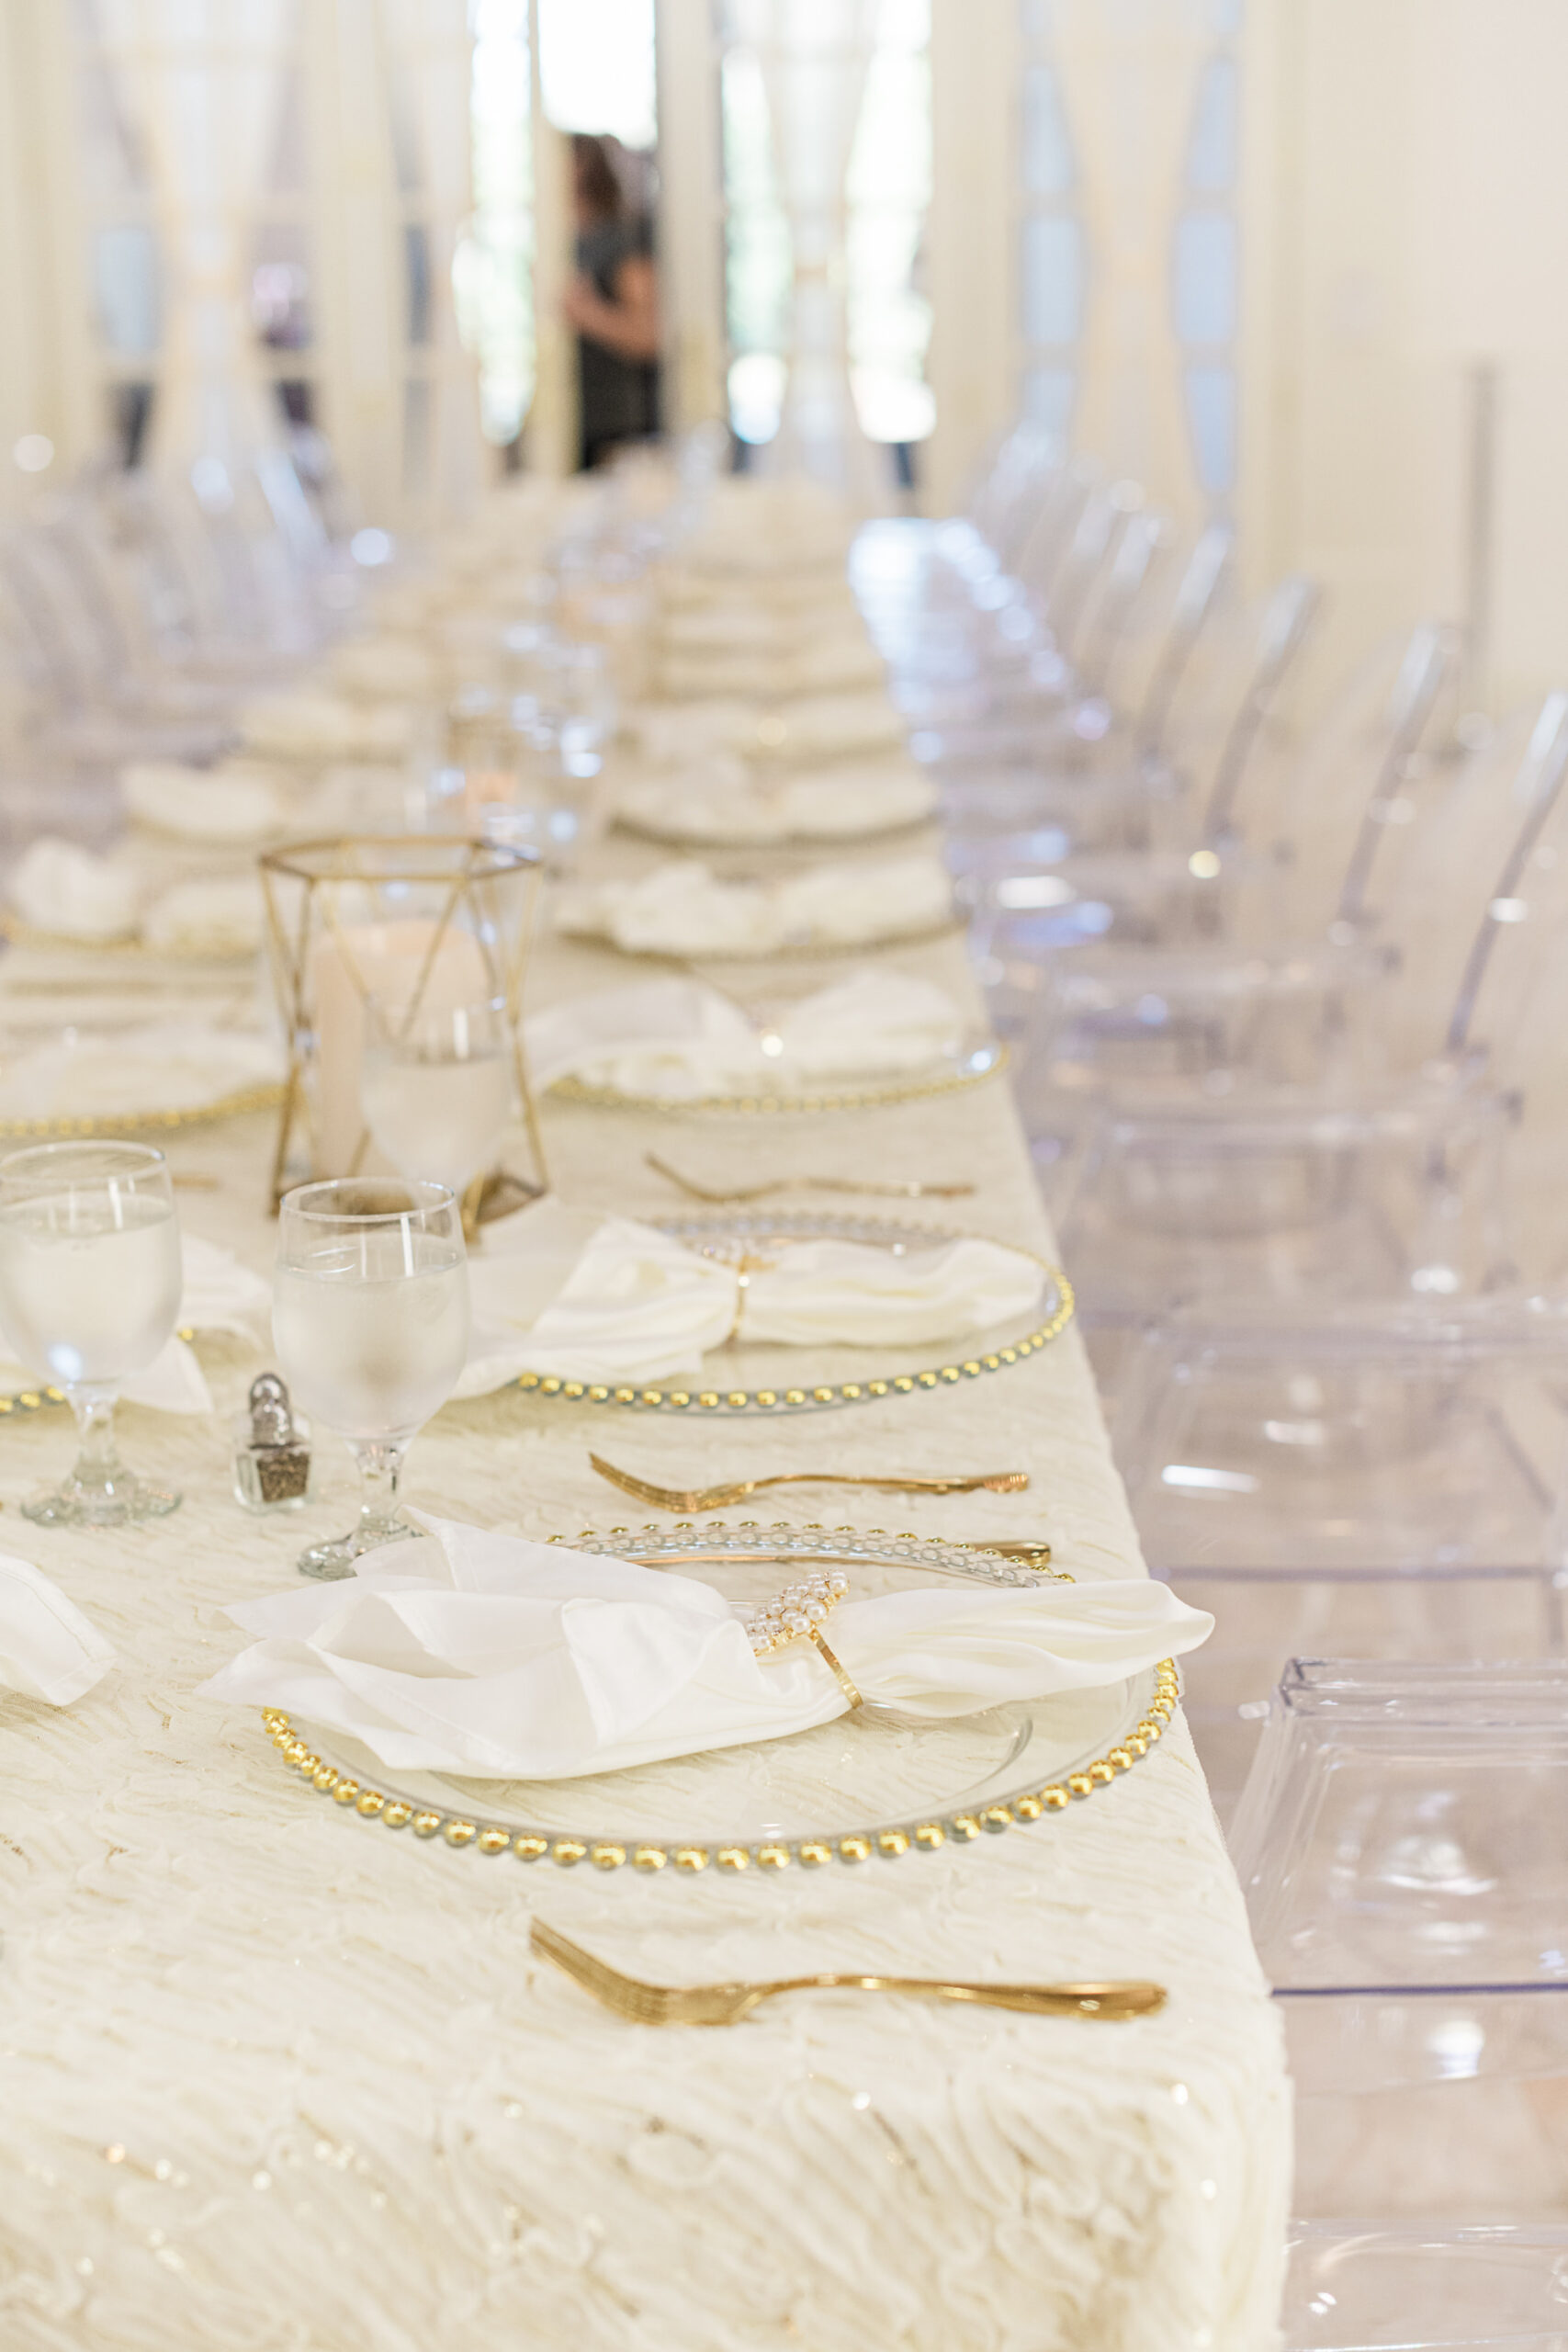 Elegant Long Feasting Tables with White Linens and Ghost Chairs Decor Inspiration | Gold Beveled Glass Chargers and Geometric Votives | Pearl Napkin Rings | Tampa Bay Outside the Box Rentals | Wedding Venue Whitehurst Gallery